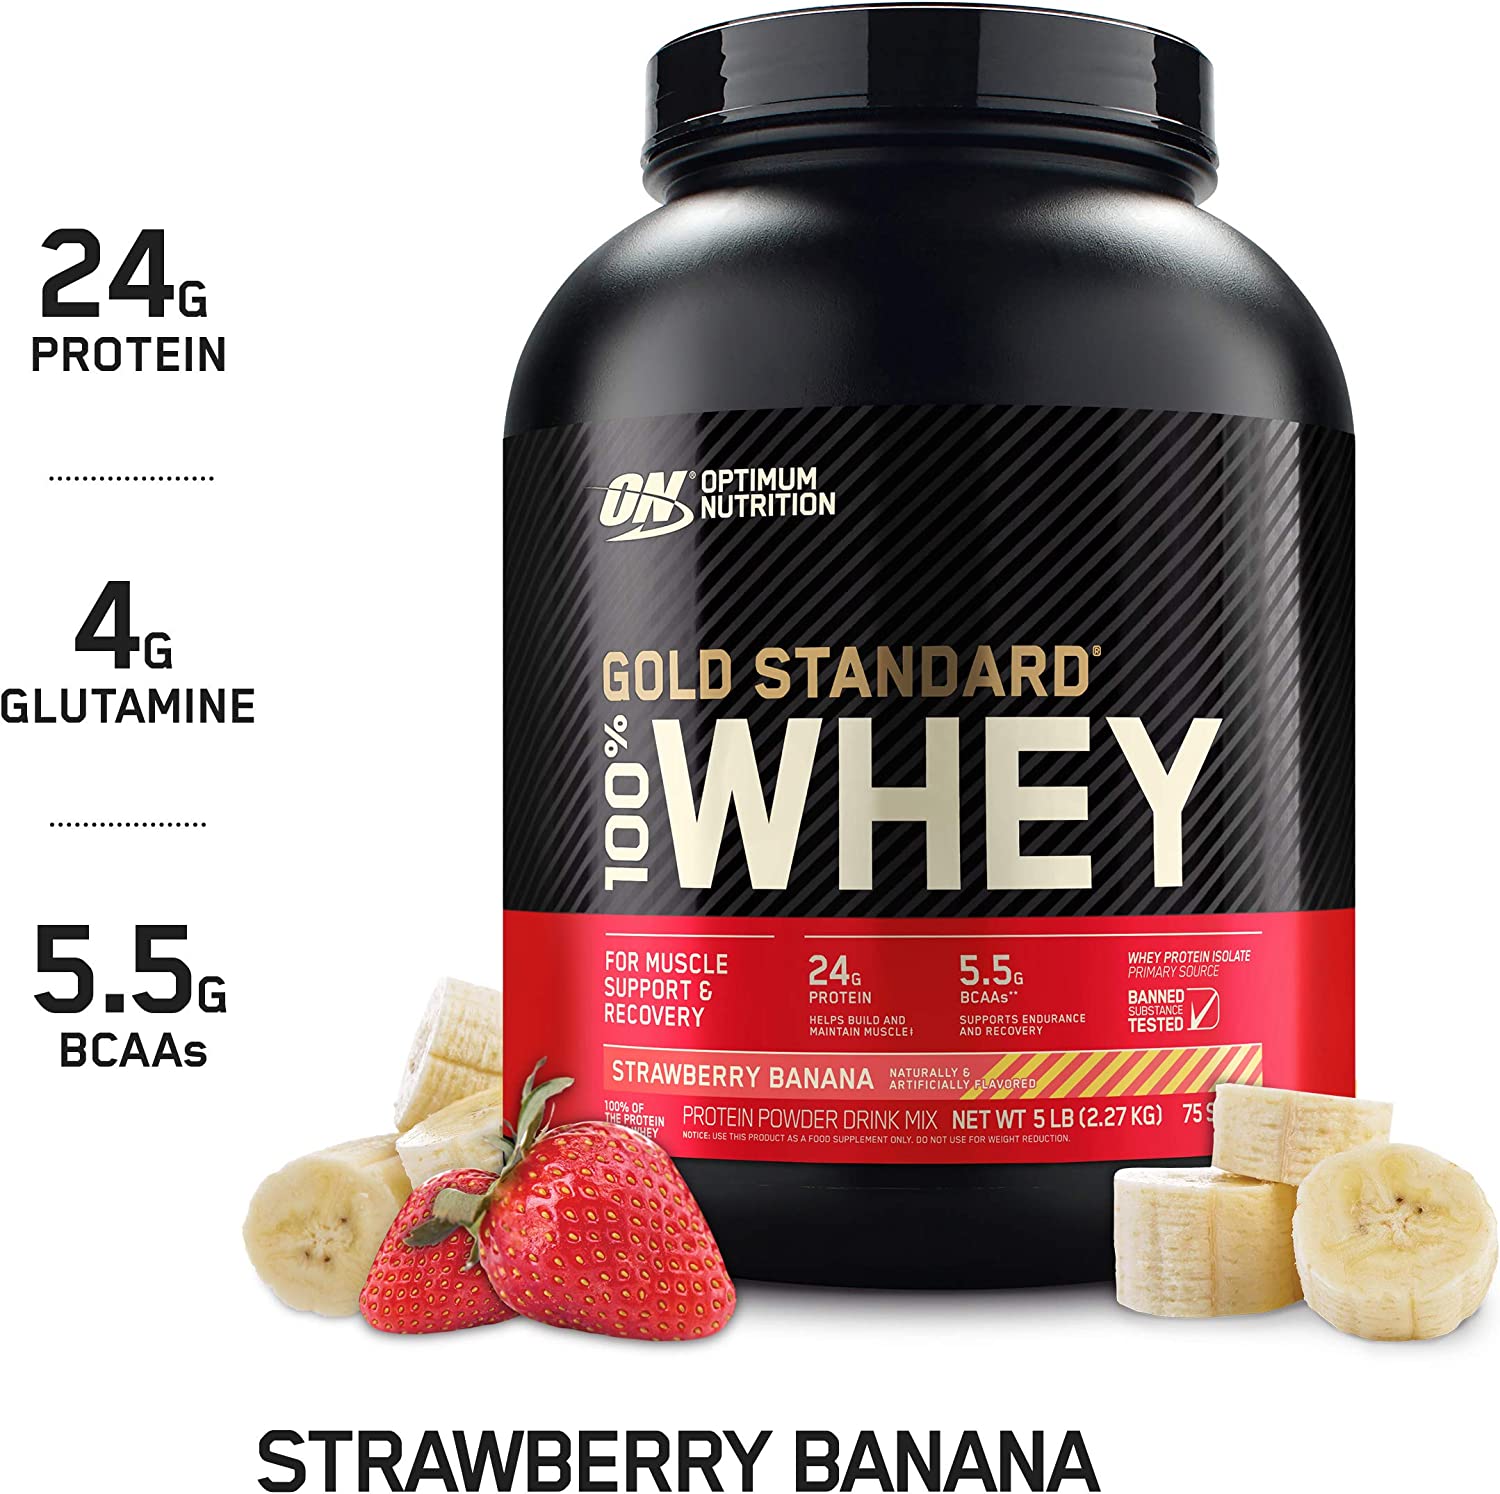 Optimum Nutrition Gold Standard 100% Whey Protein Powder, Banana Cream, 5 Pound (Packaging May Vary) $46.98